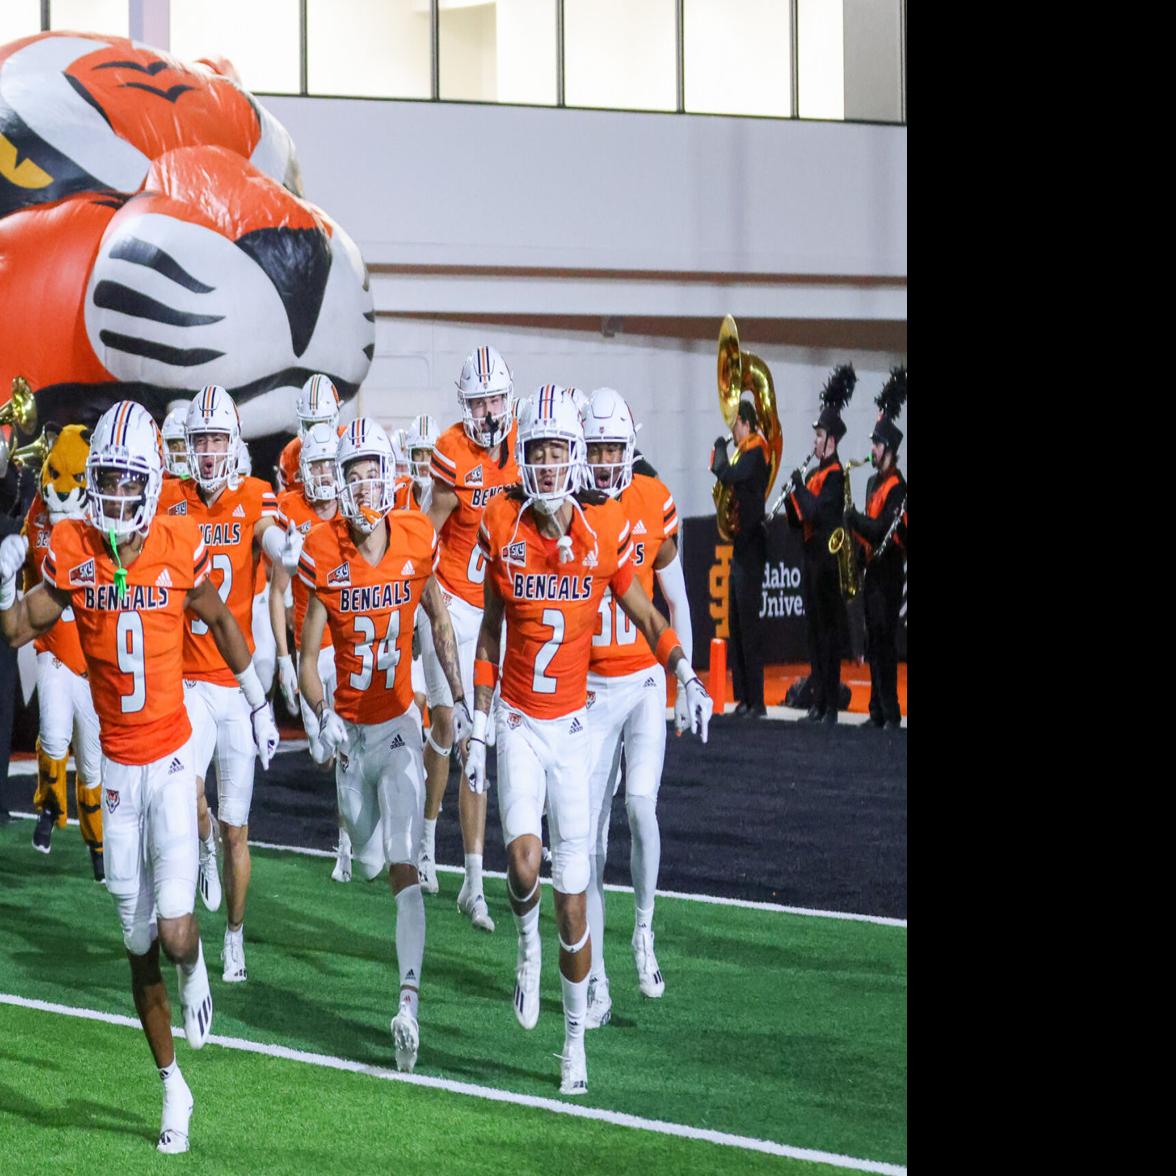 Bengals hoping for first win on Saturday against Northern Colorado, Isu